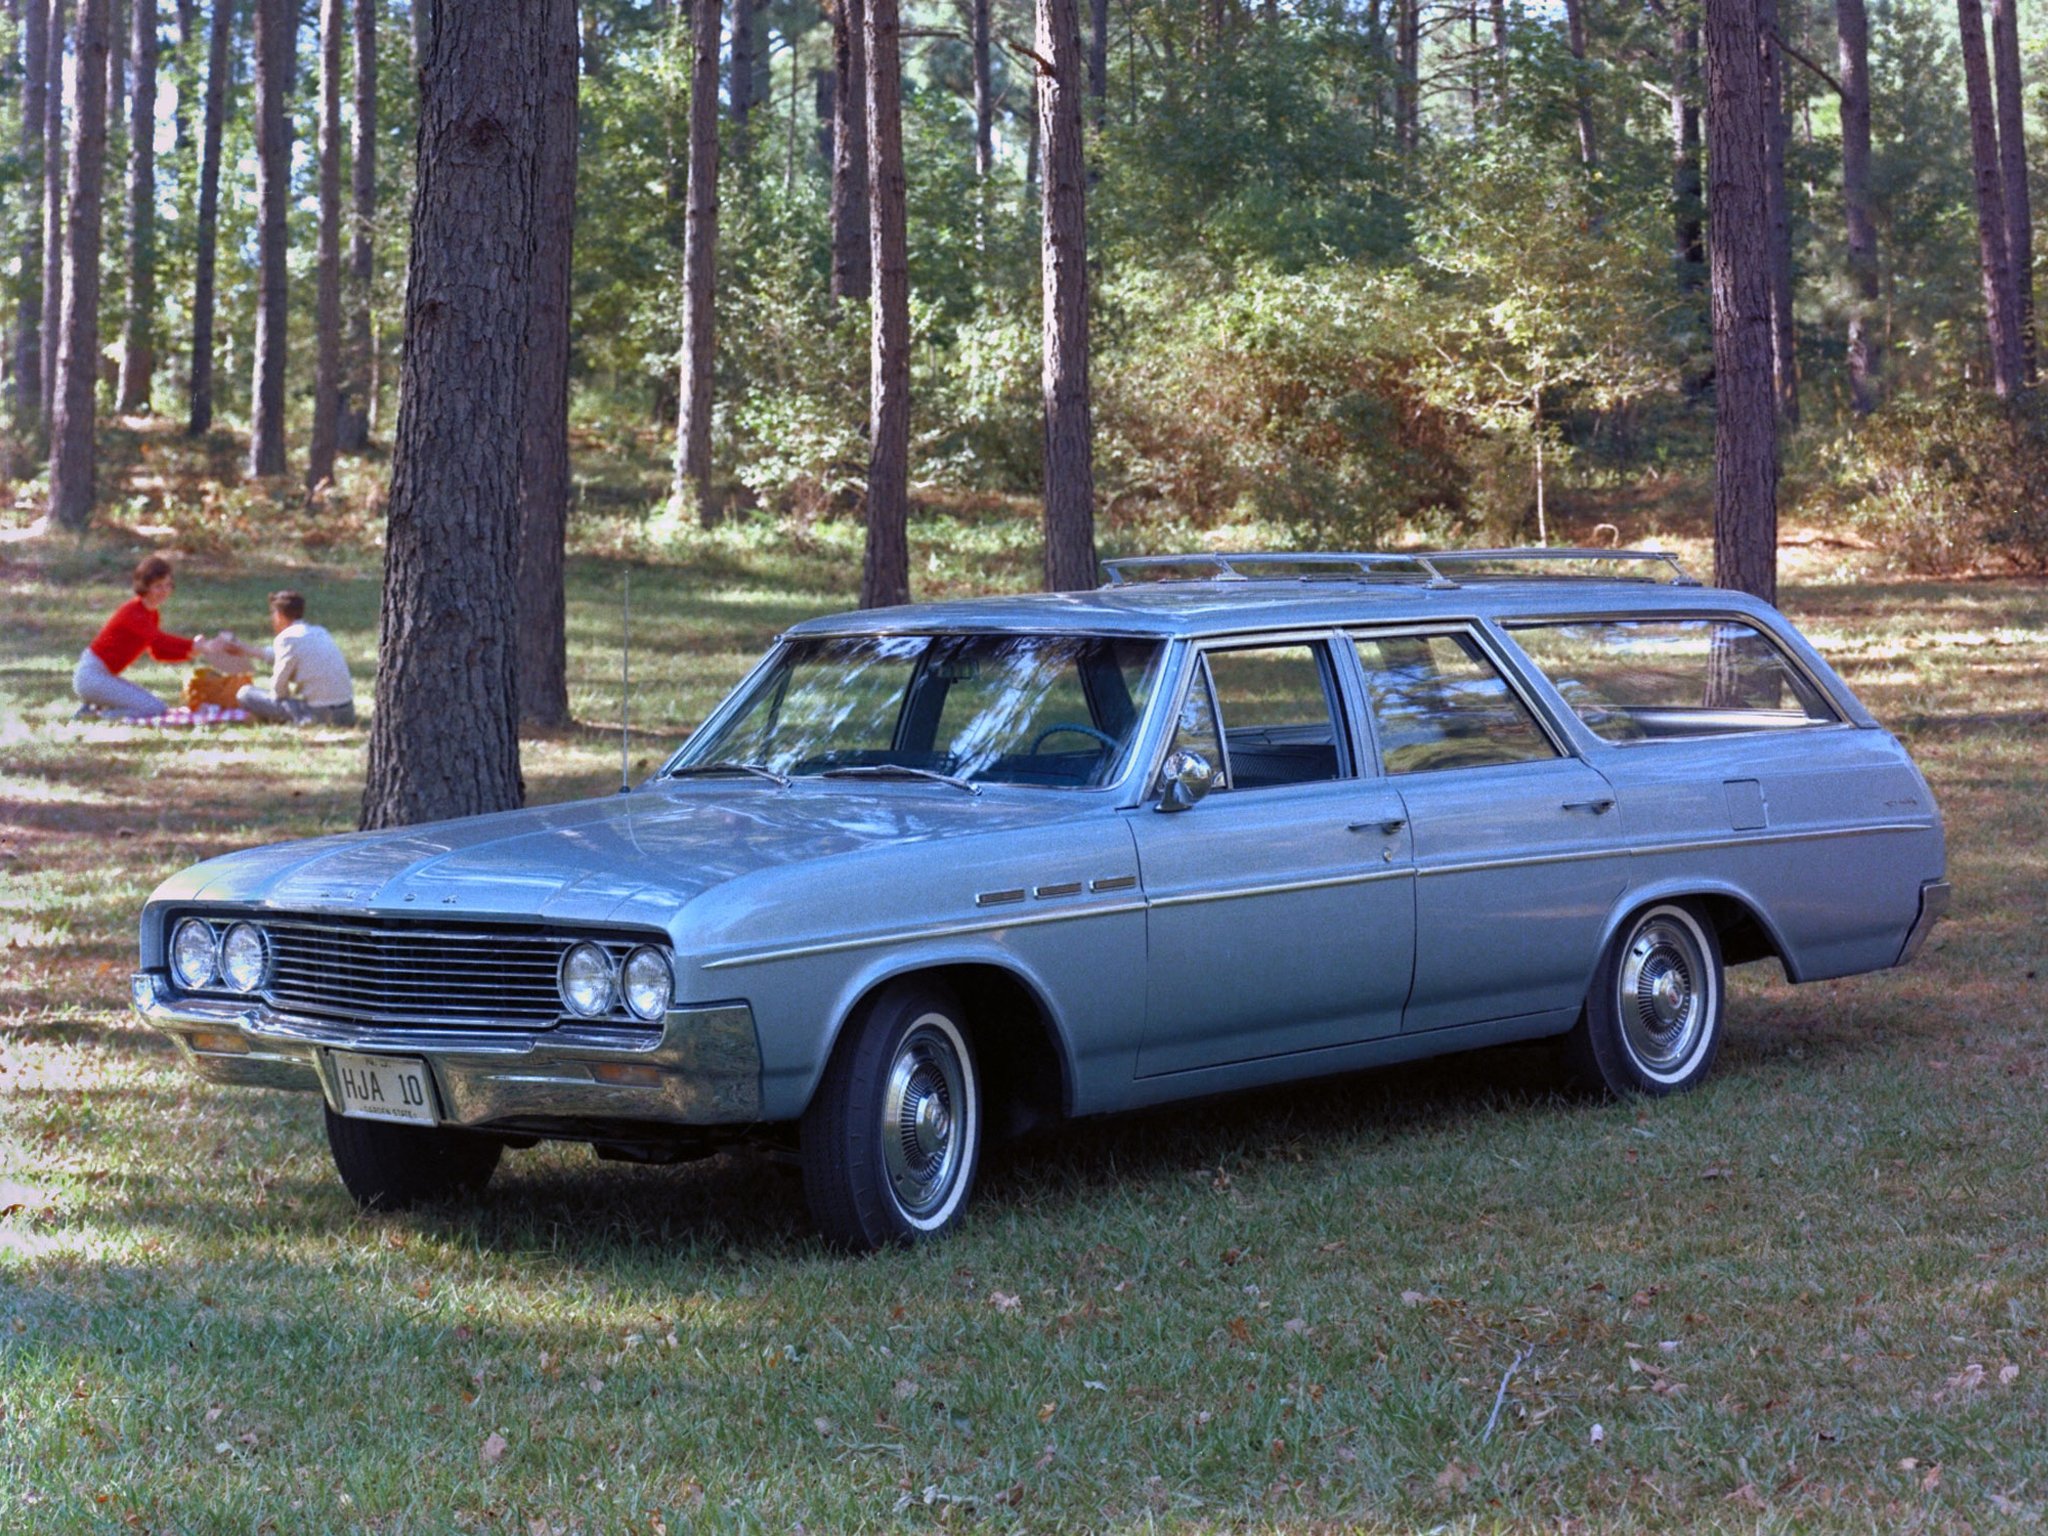 1964, Buick, Special, Deluxe, Wagon,  4135 , Stationwagon, Classic Wallpaper